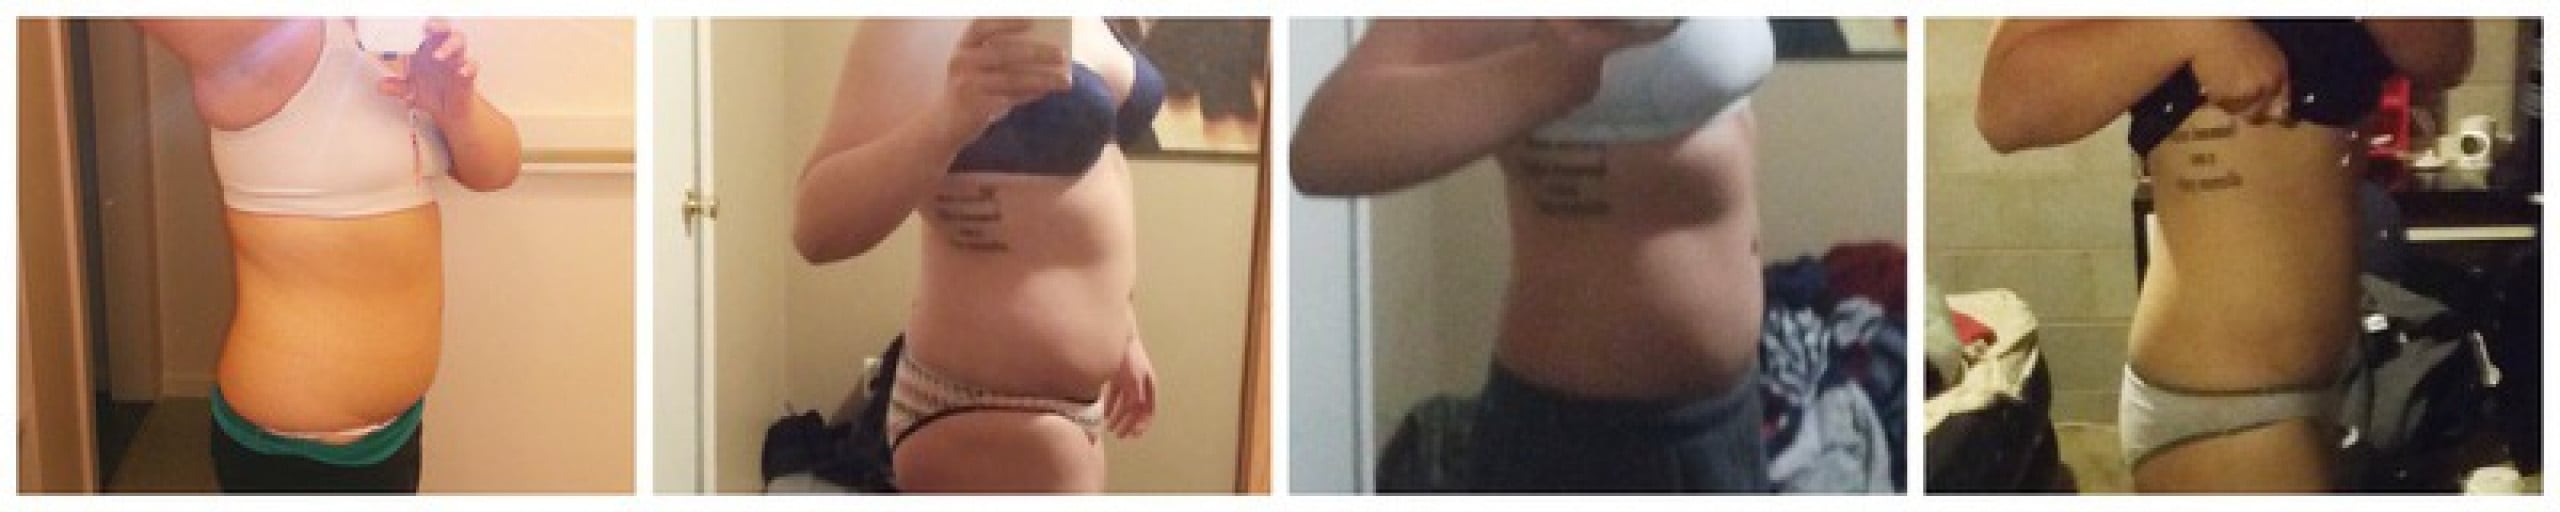 A progress pic of a 5'7" woman showing a weight reduction from 200 pounds to 167 pounds. A total loss of 33 pounds.